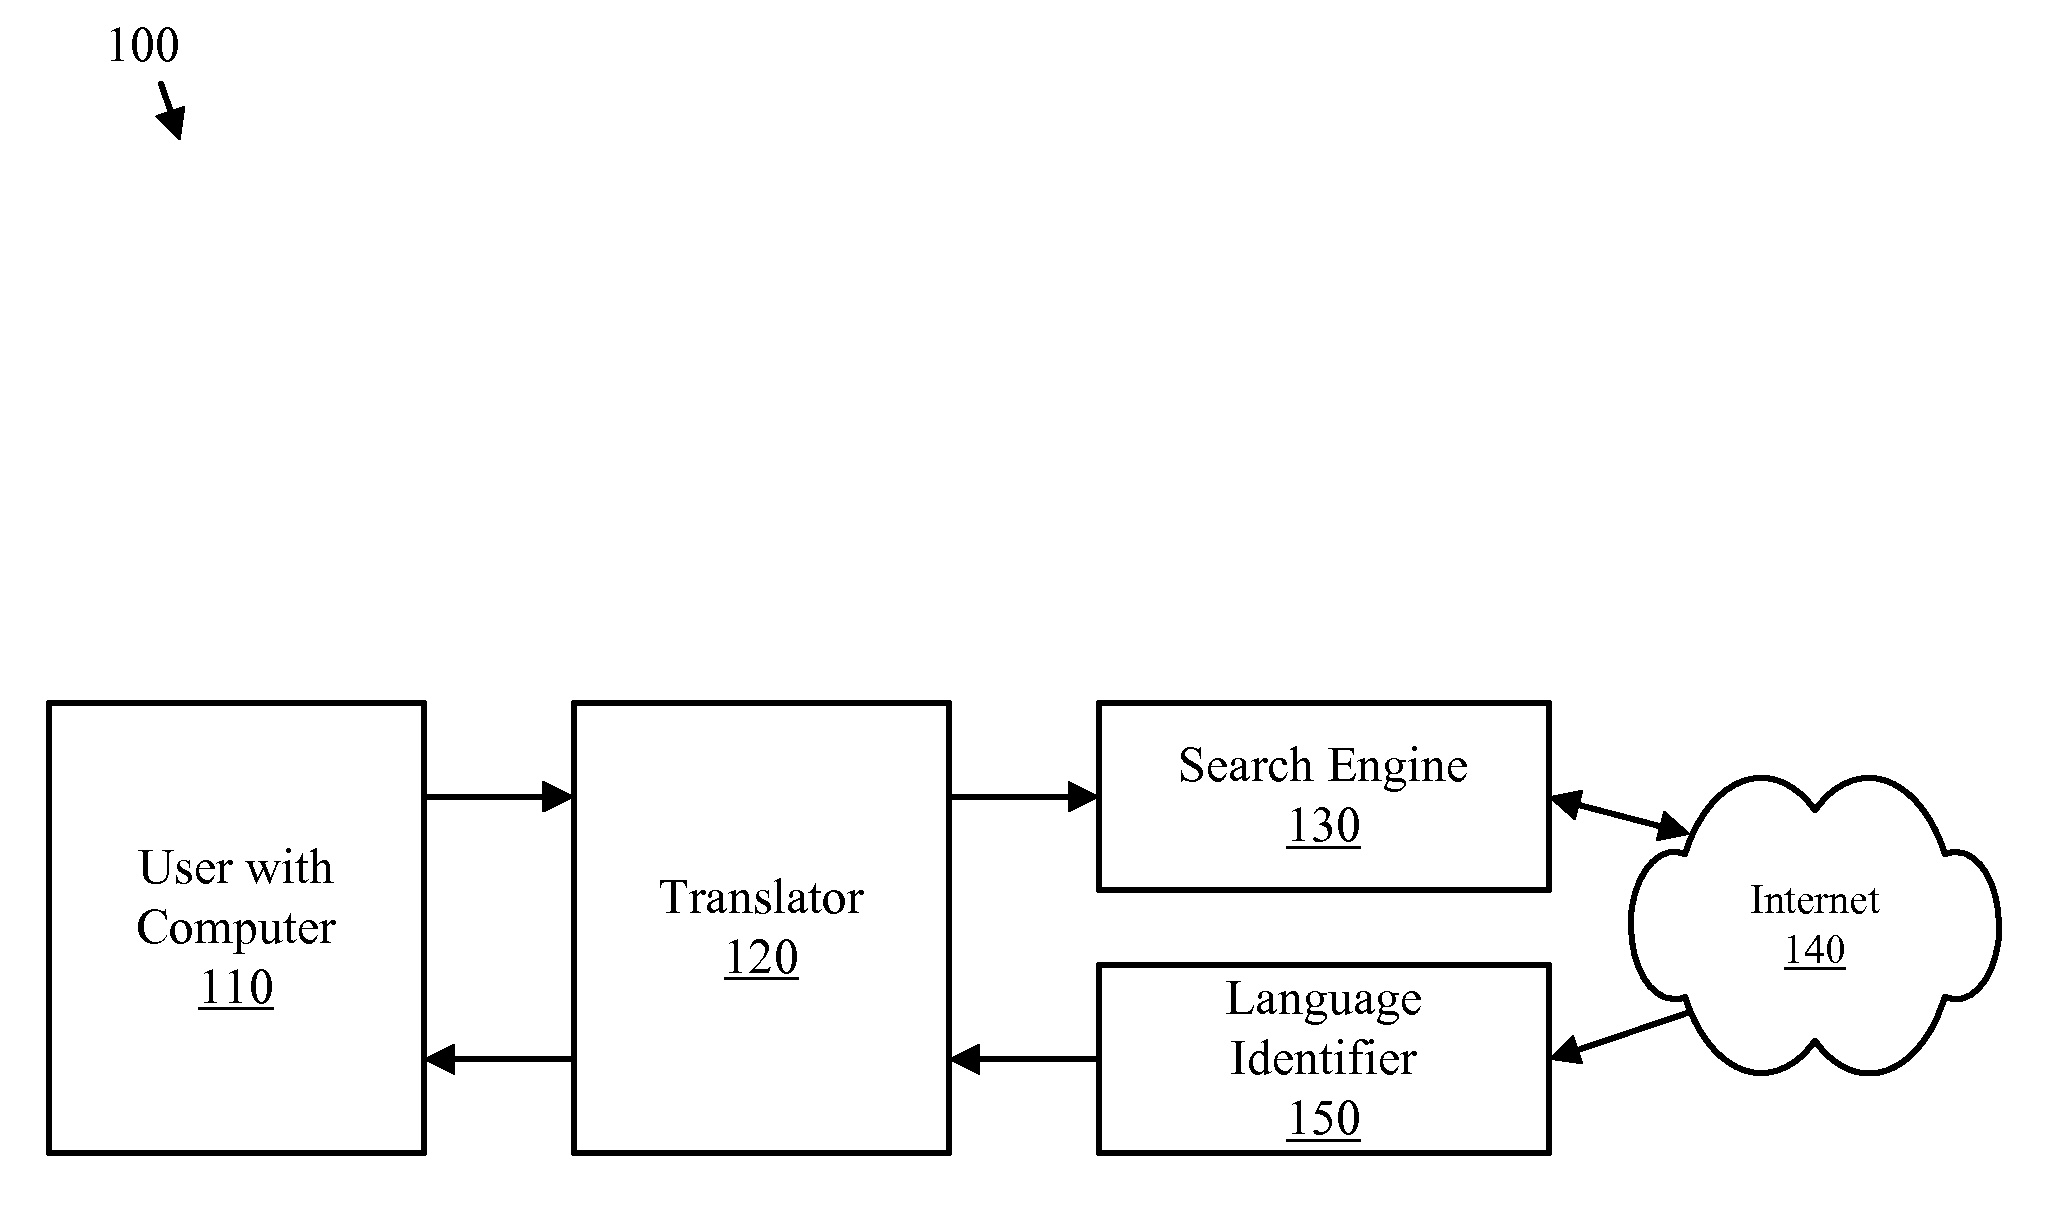 Method for multi-lingual search and data mining